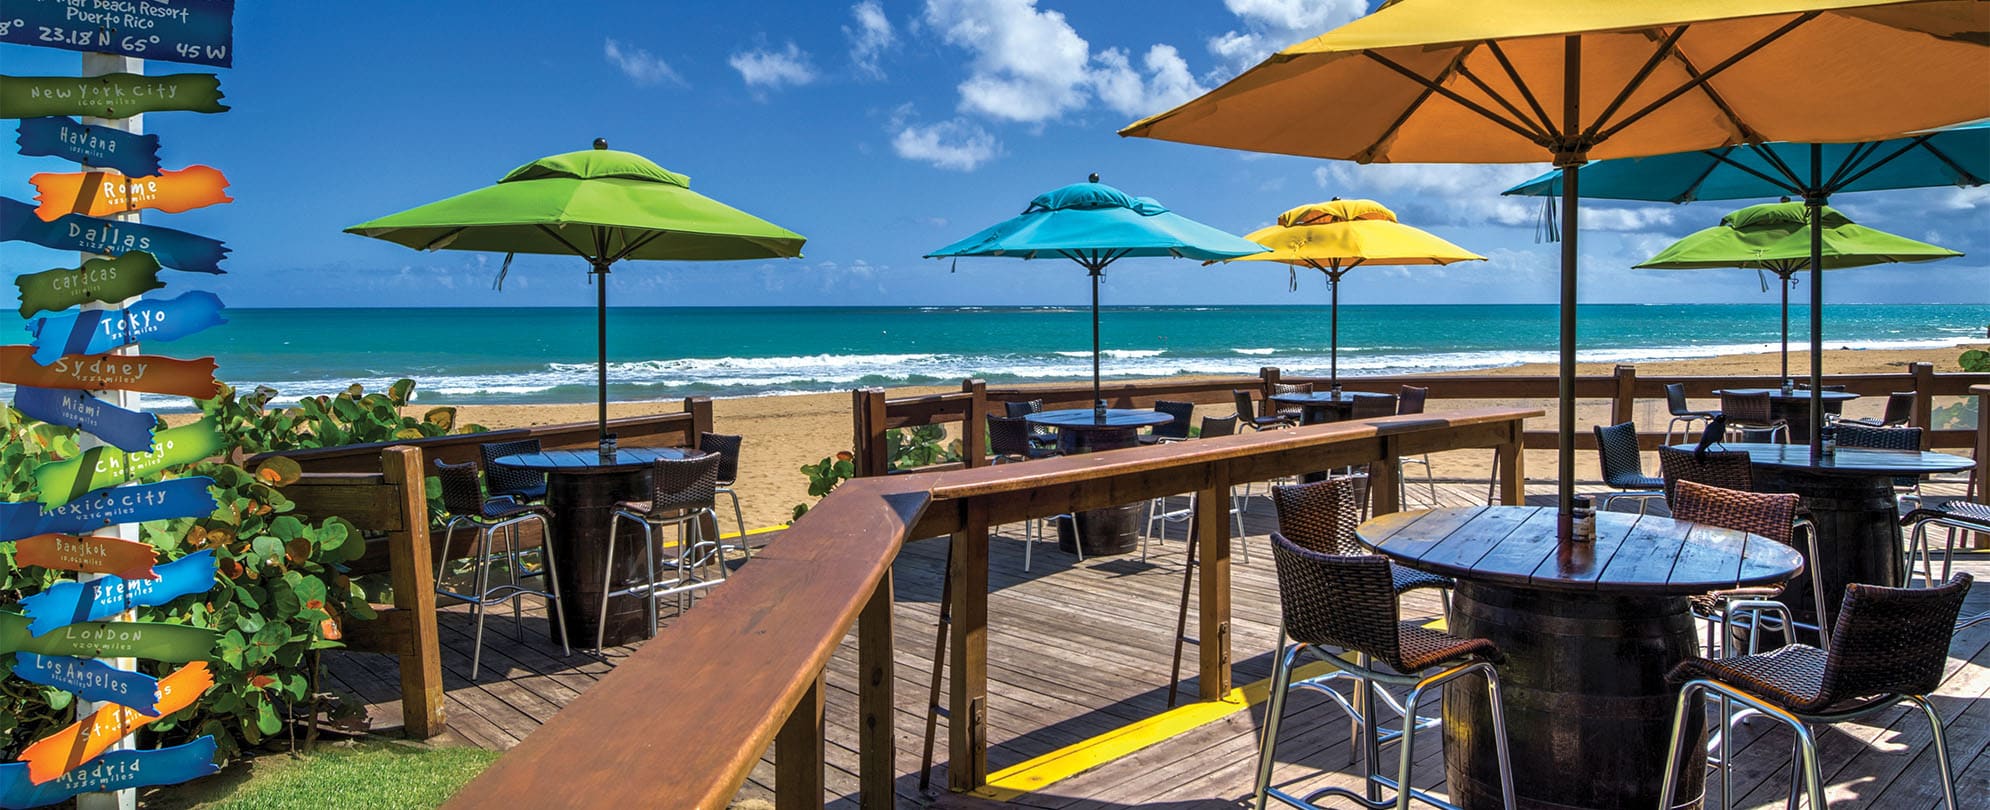 Wood tables with colorful umbrellas on a beachfront deck at Margaritaville Vacation Club by Wyndham - Rio Mar.